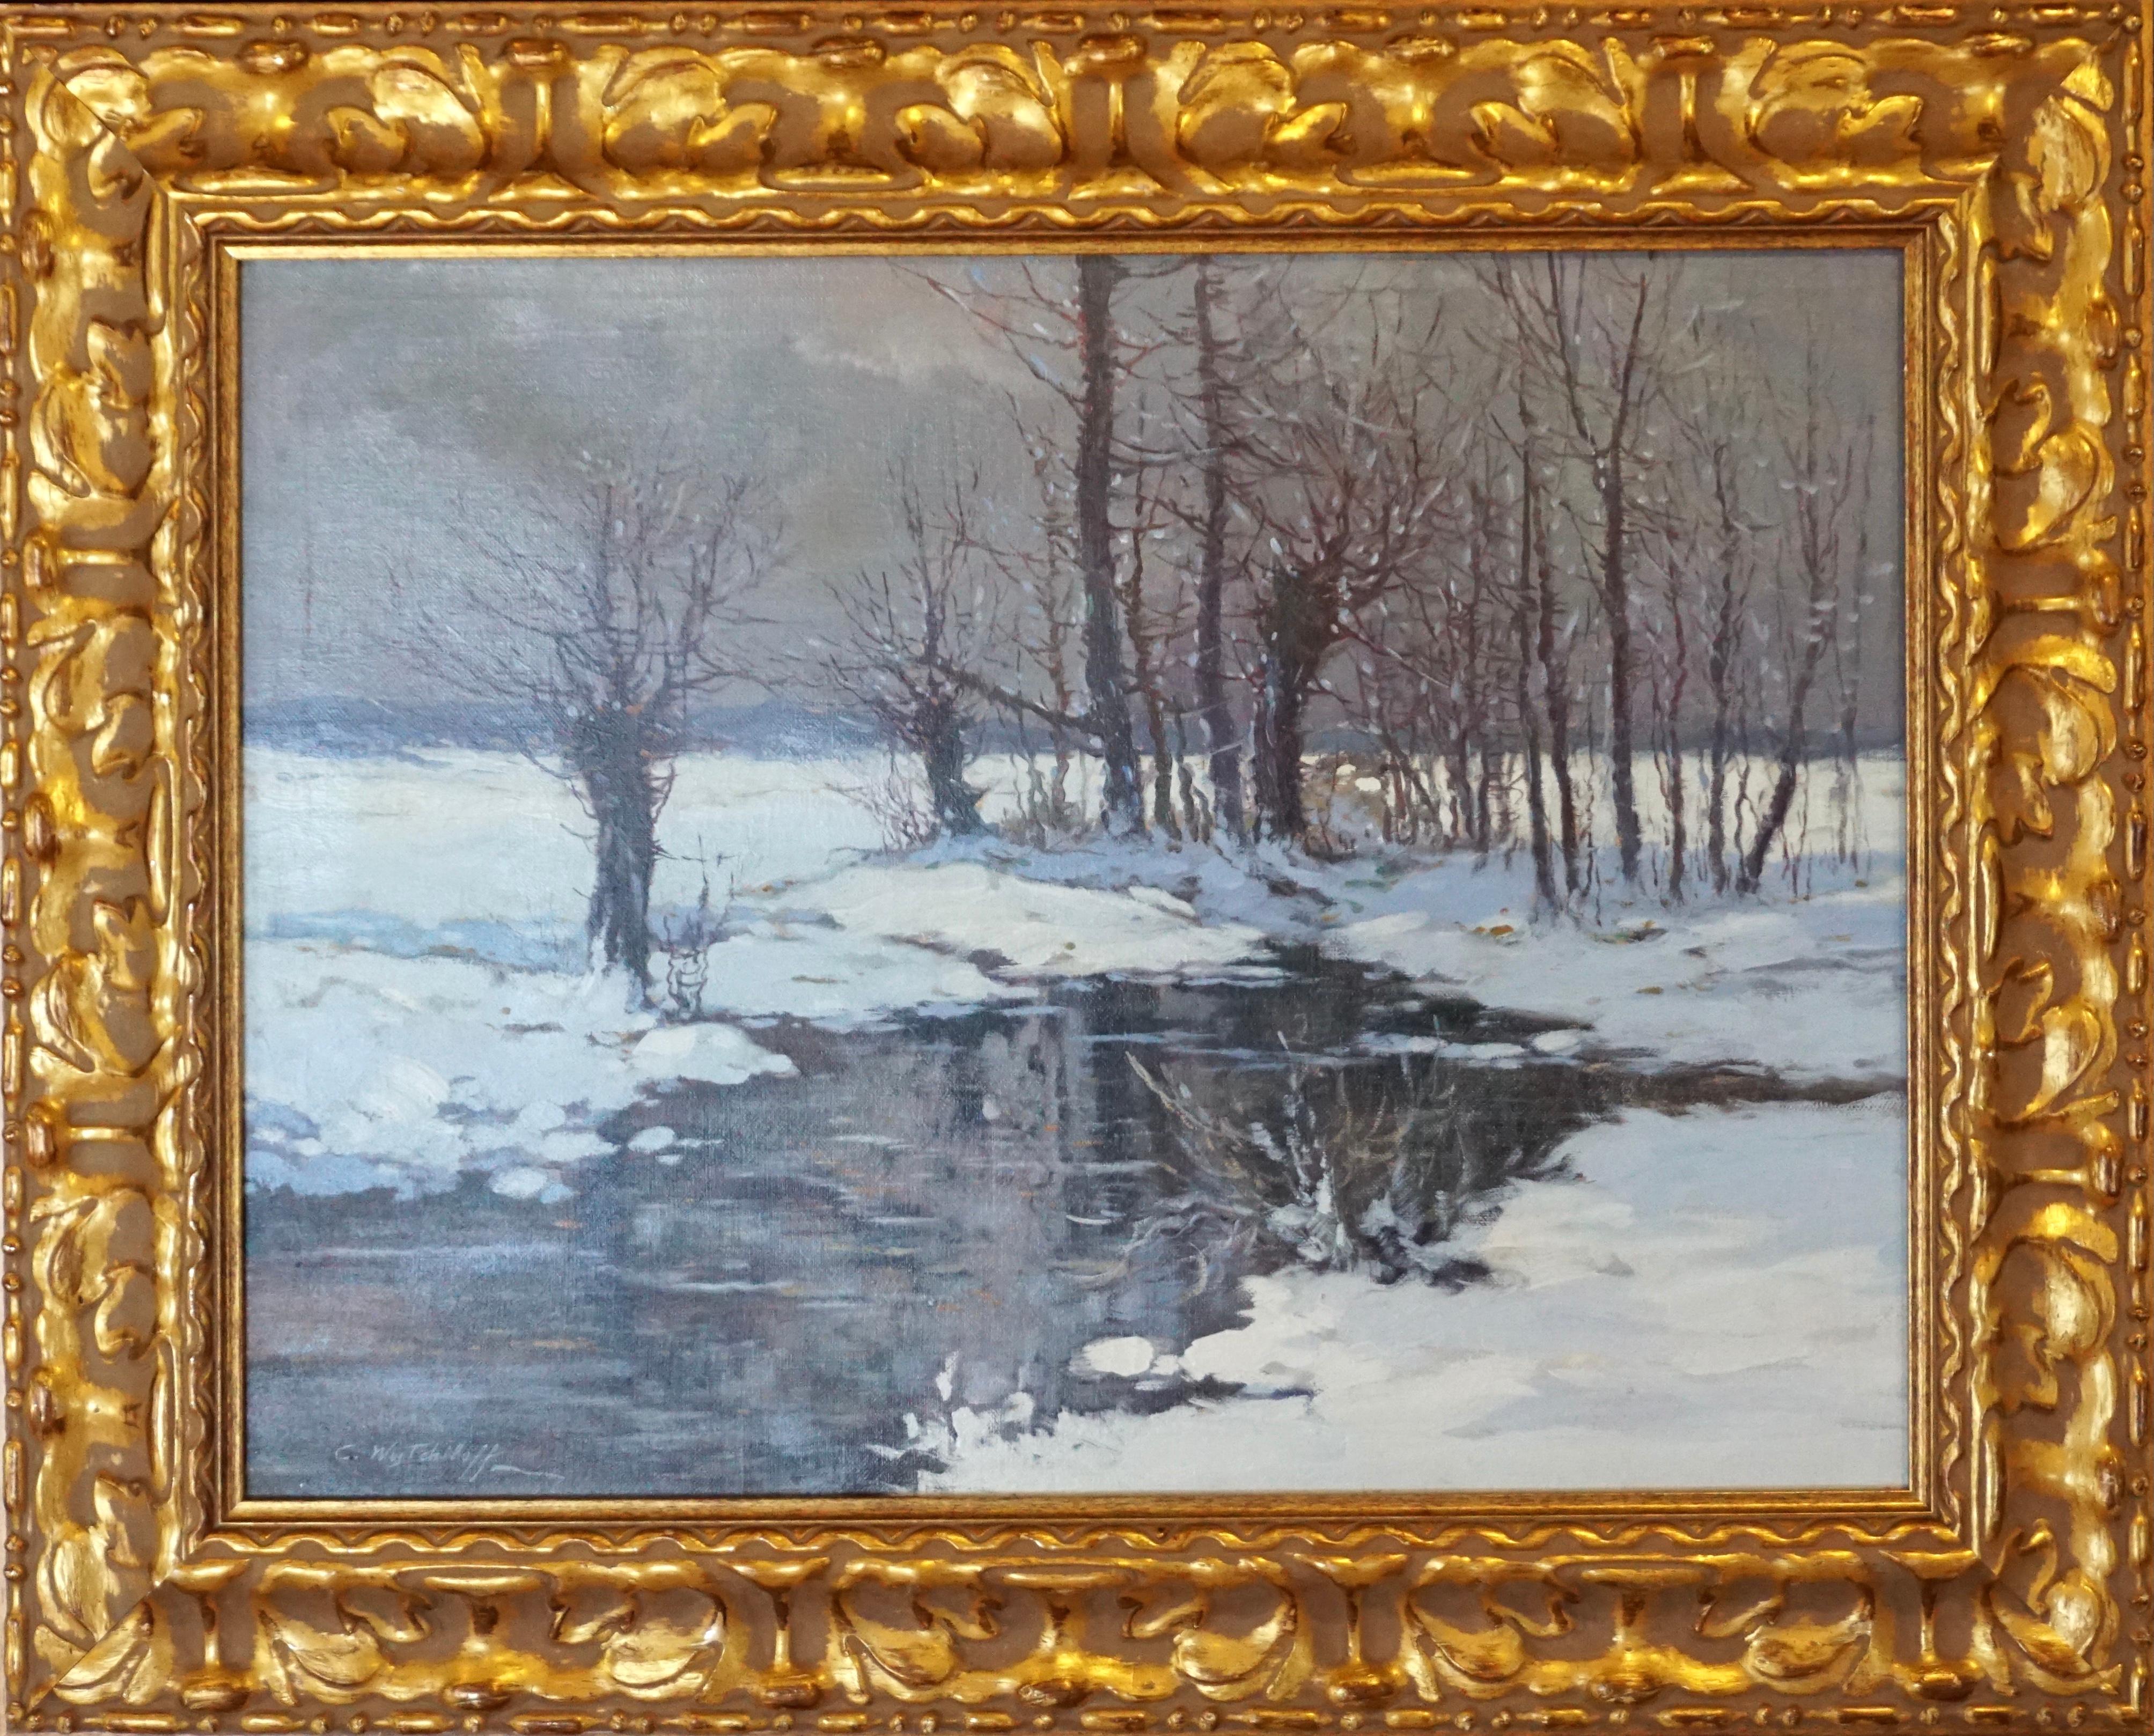 Constantin Alexandrovitch Westchiloff (American/Russian, 1877-1945), untitled scene of a snowy far off meadow in the moon light. Oil on canvas, signed lower right

Measures: Canvas: 20.85 x 27.75 inches
Framed: 29 x 35.75 inches

Condition: